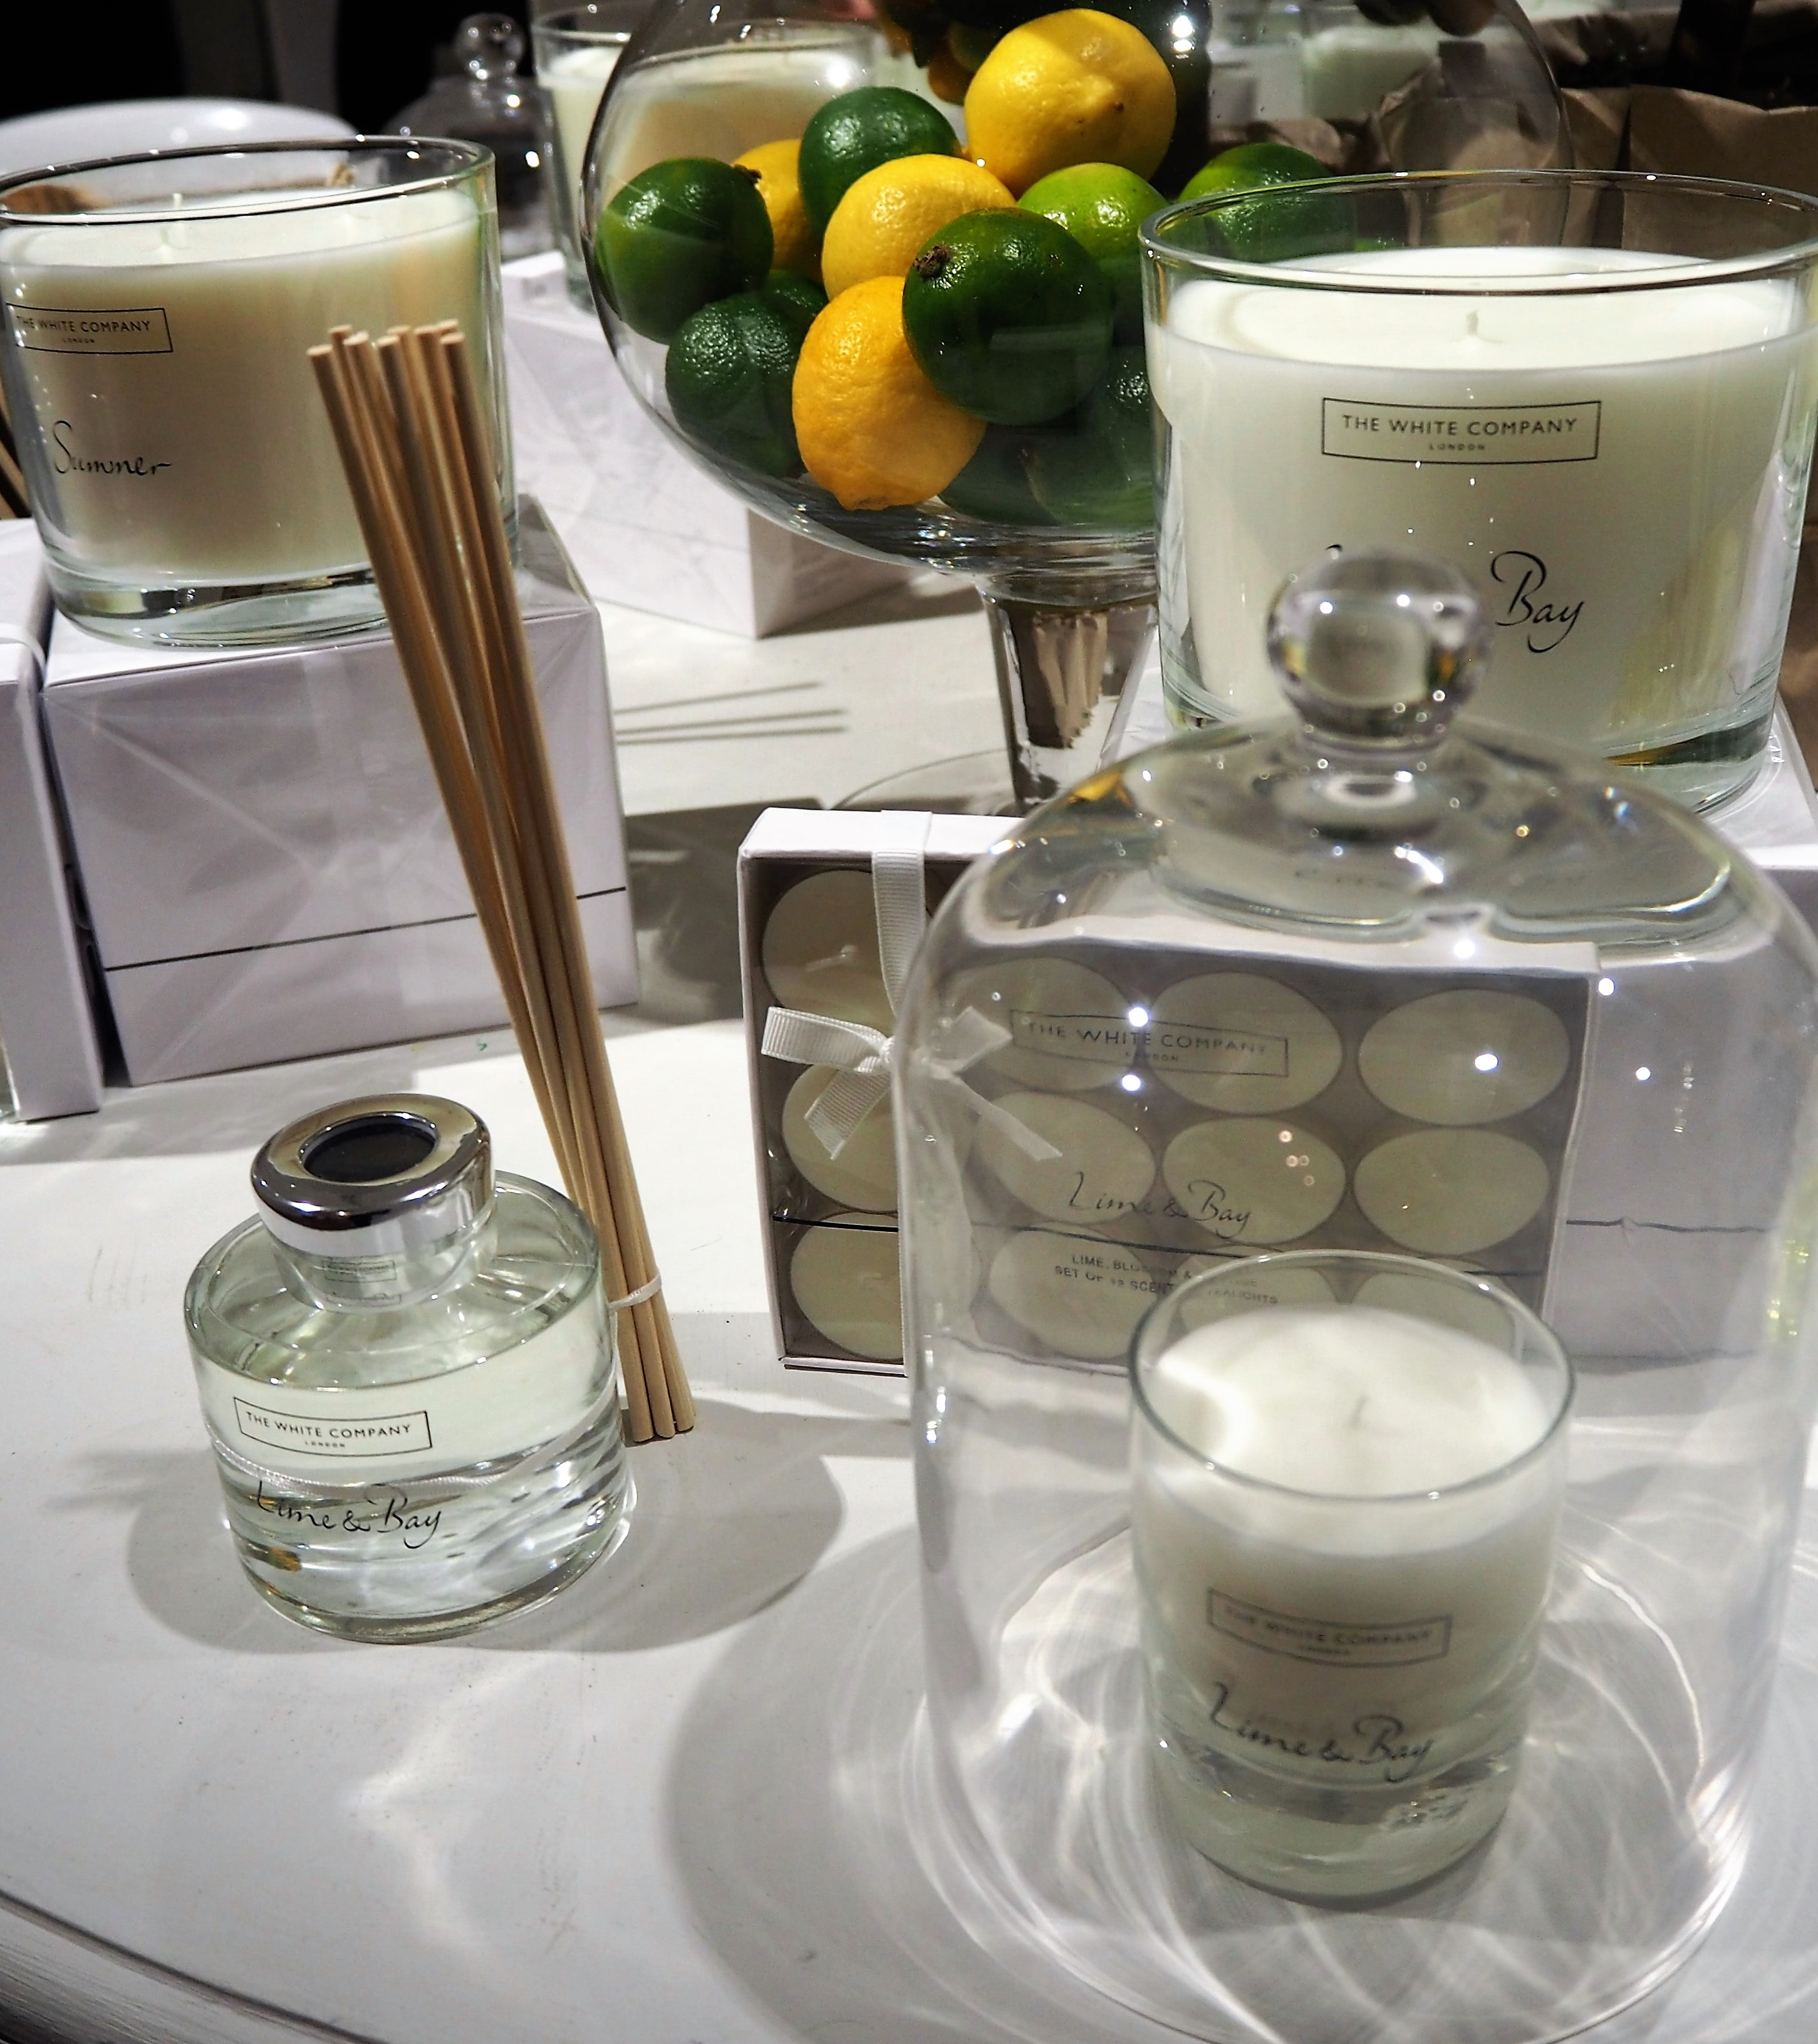 The White Company candles